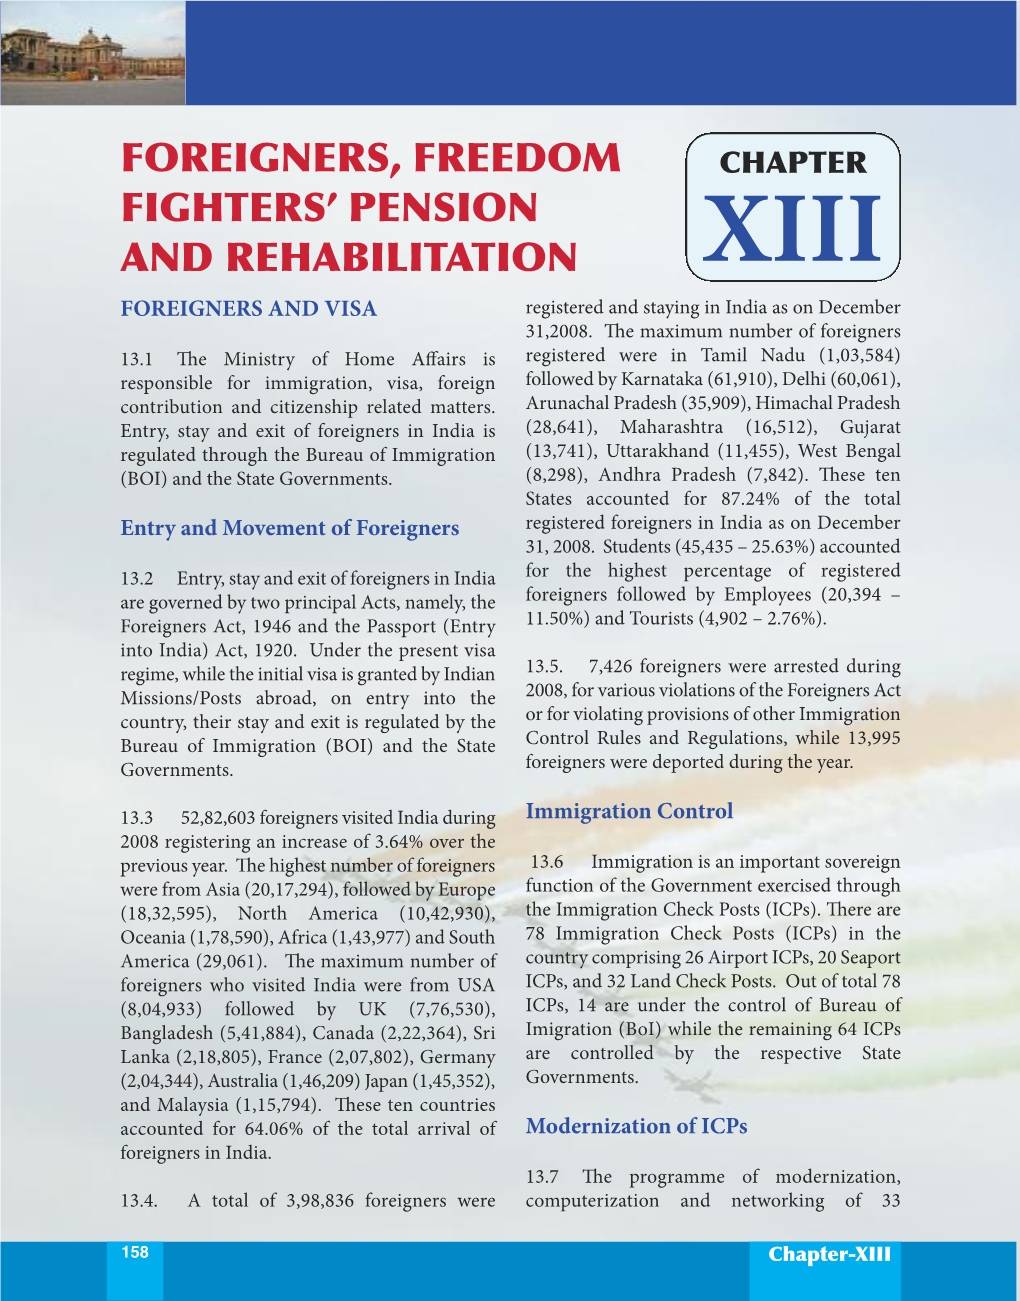 Foreigners, Freedom Fighters Pension and Rehabilitation